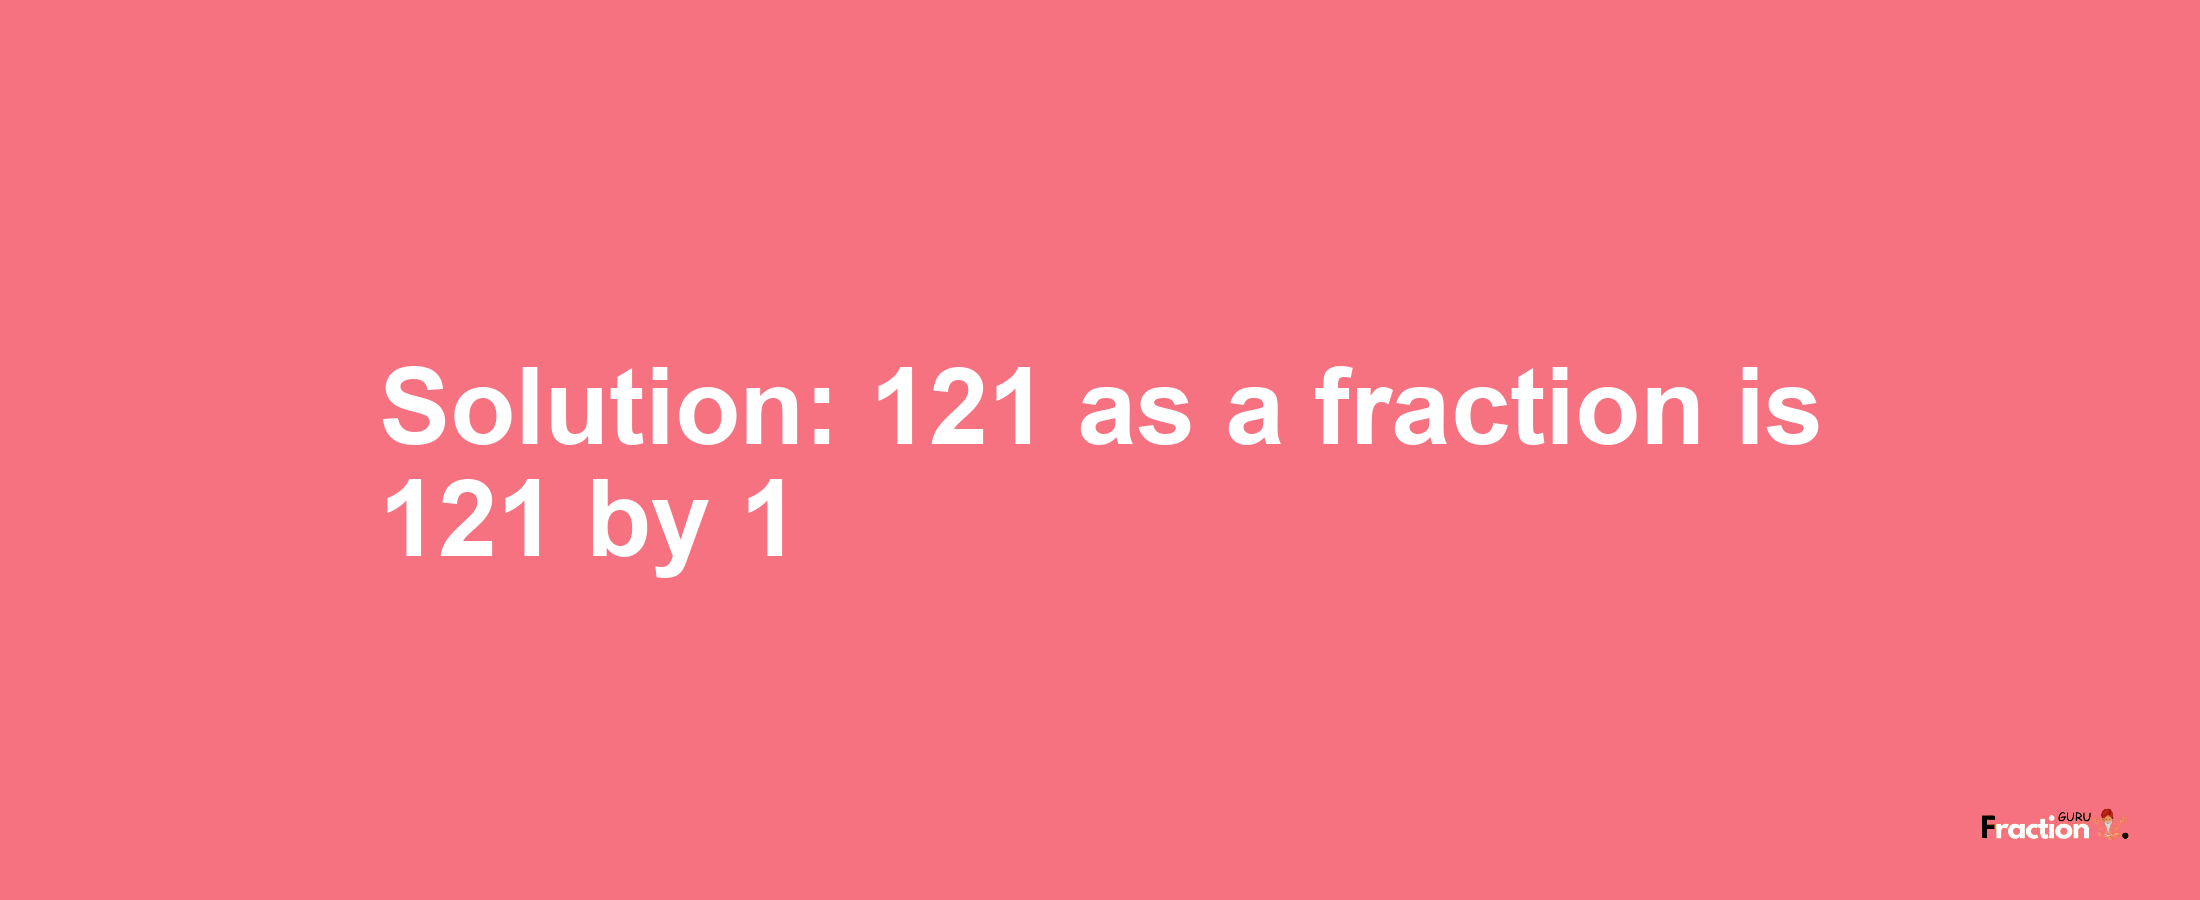 Solution:121 as a fraction is 121/1